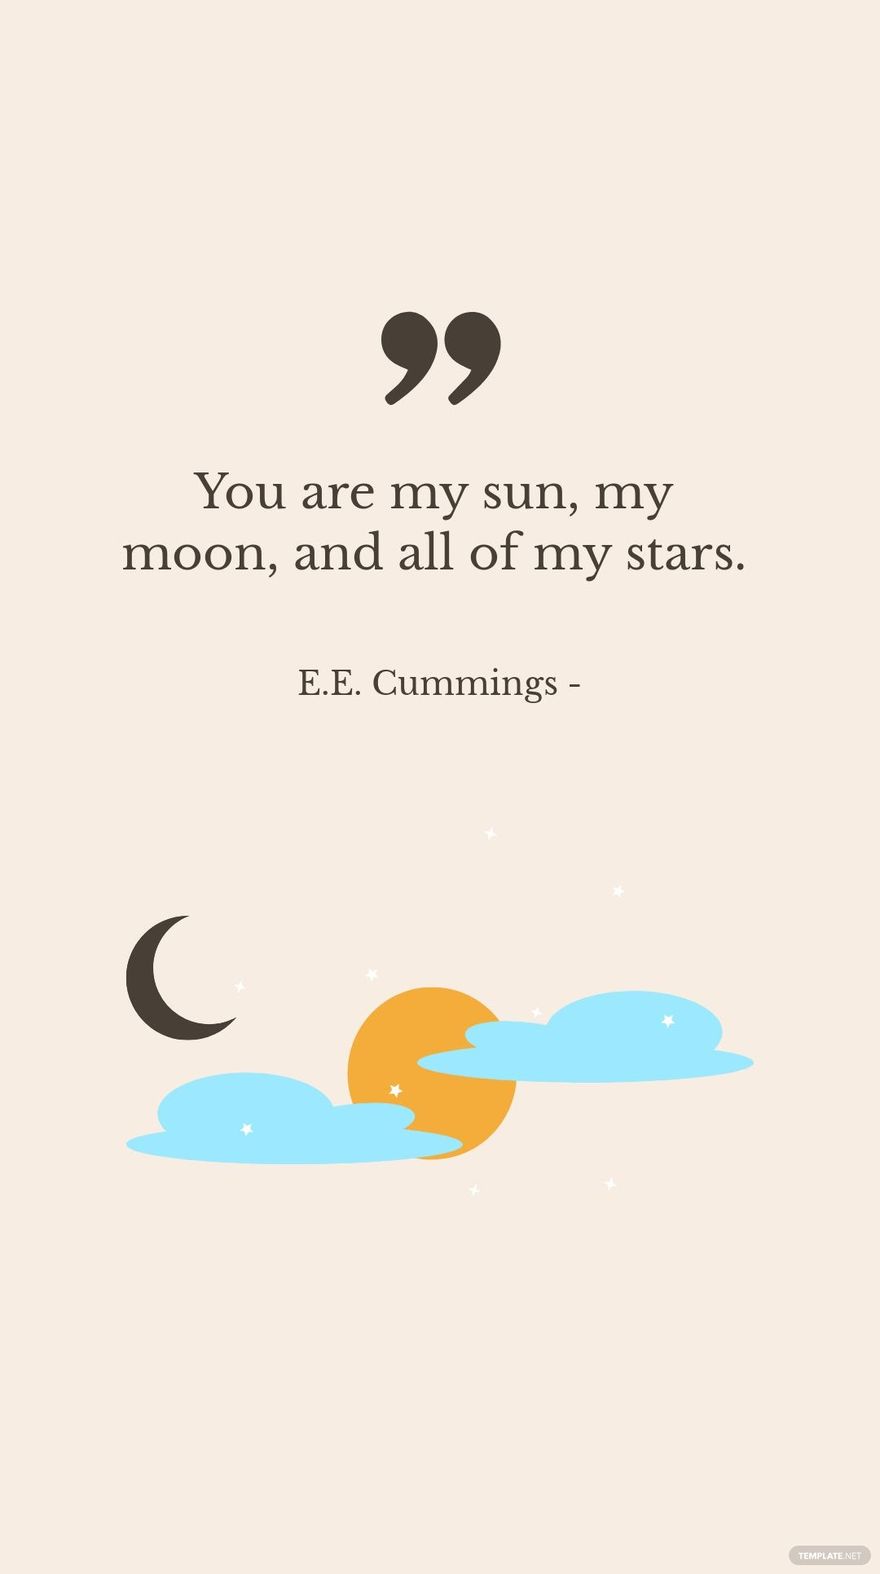 E.E. Cummings - You are my sun, my moon, and all of my stars.